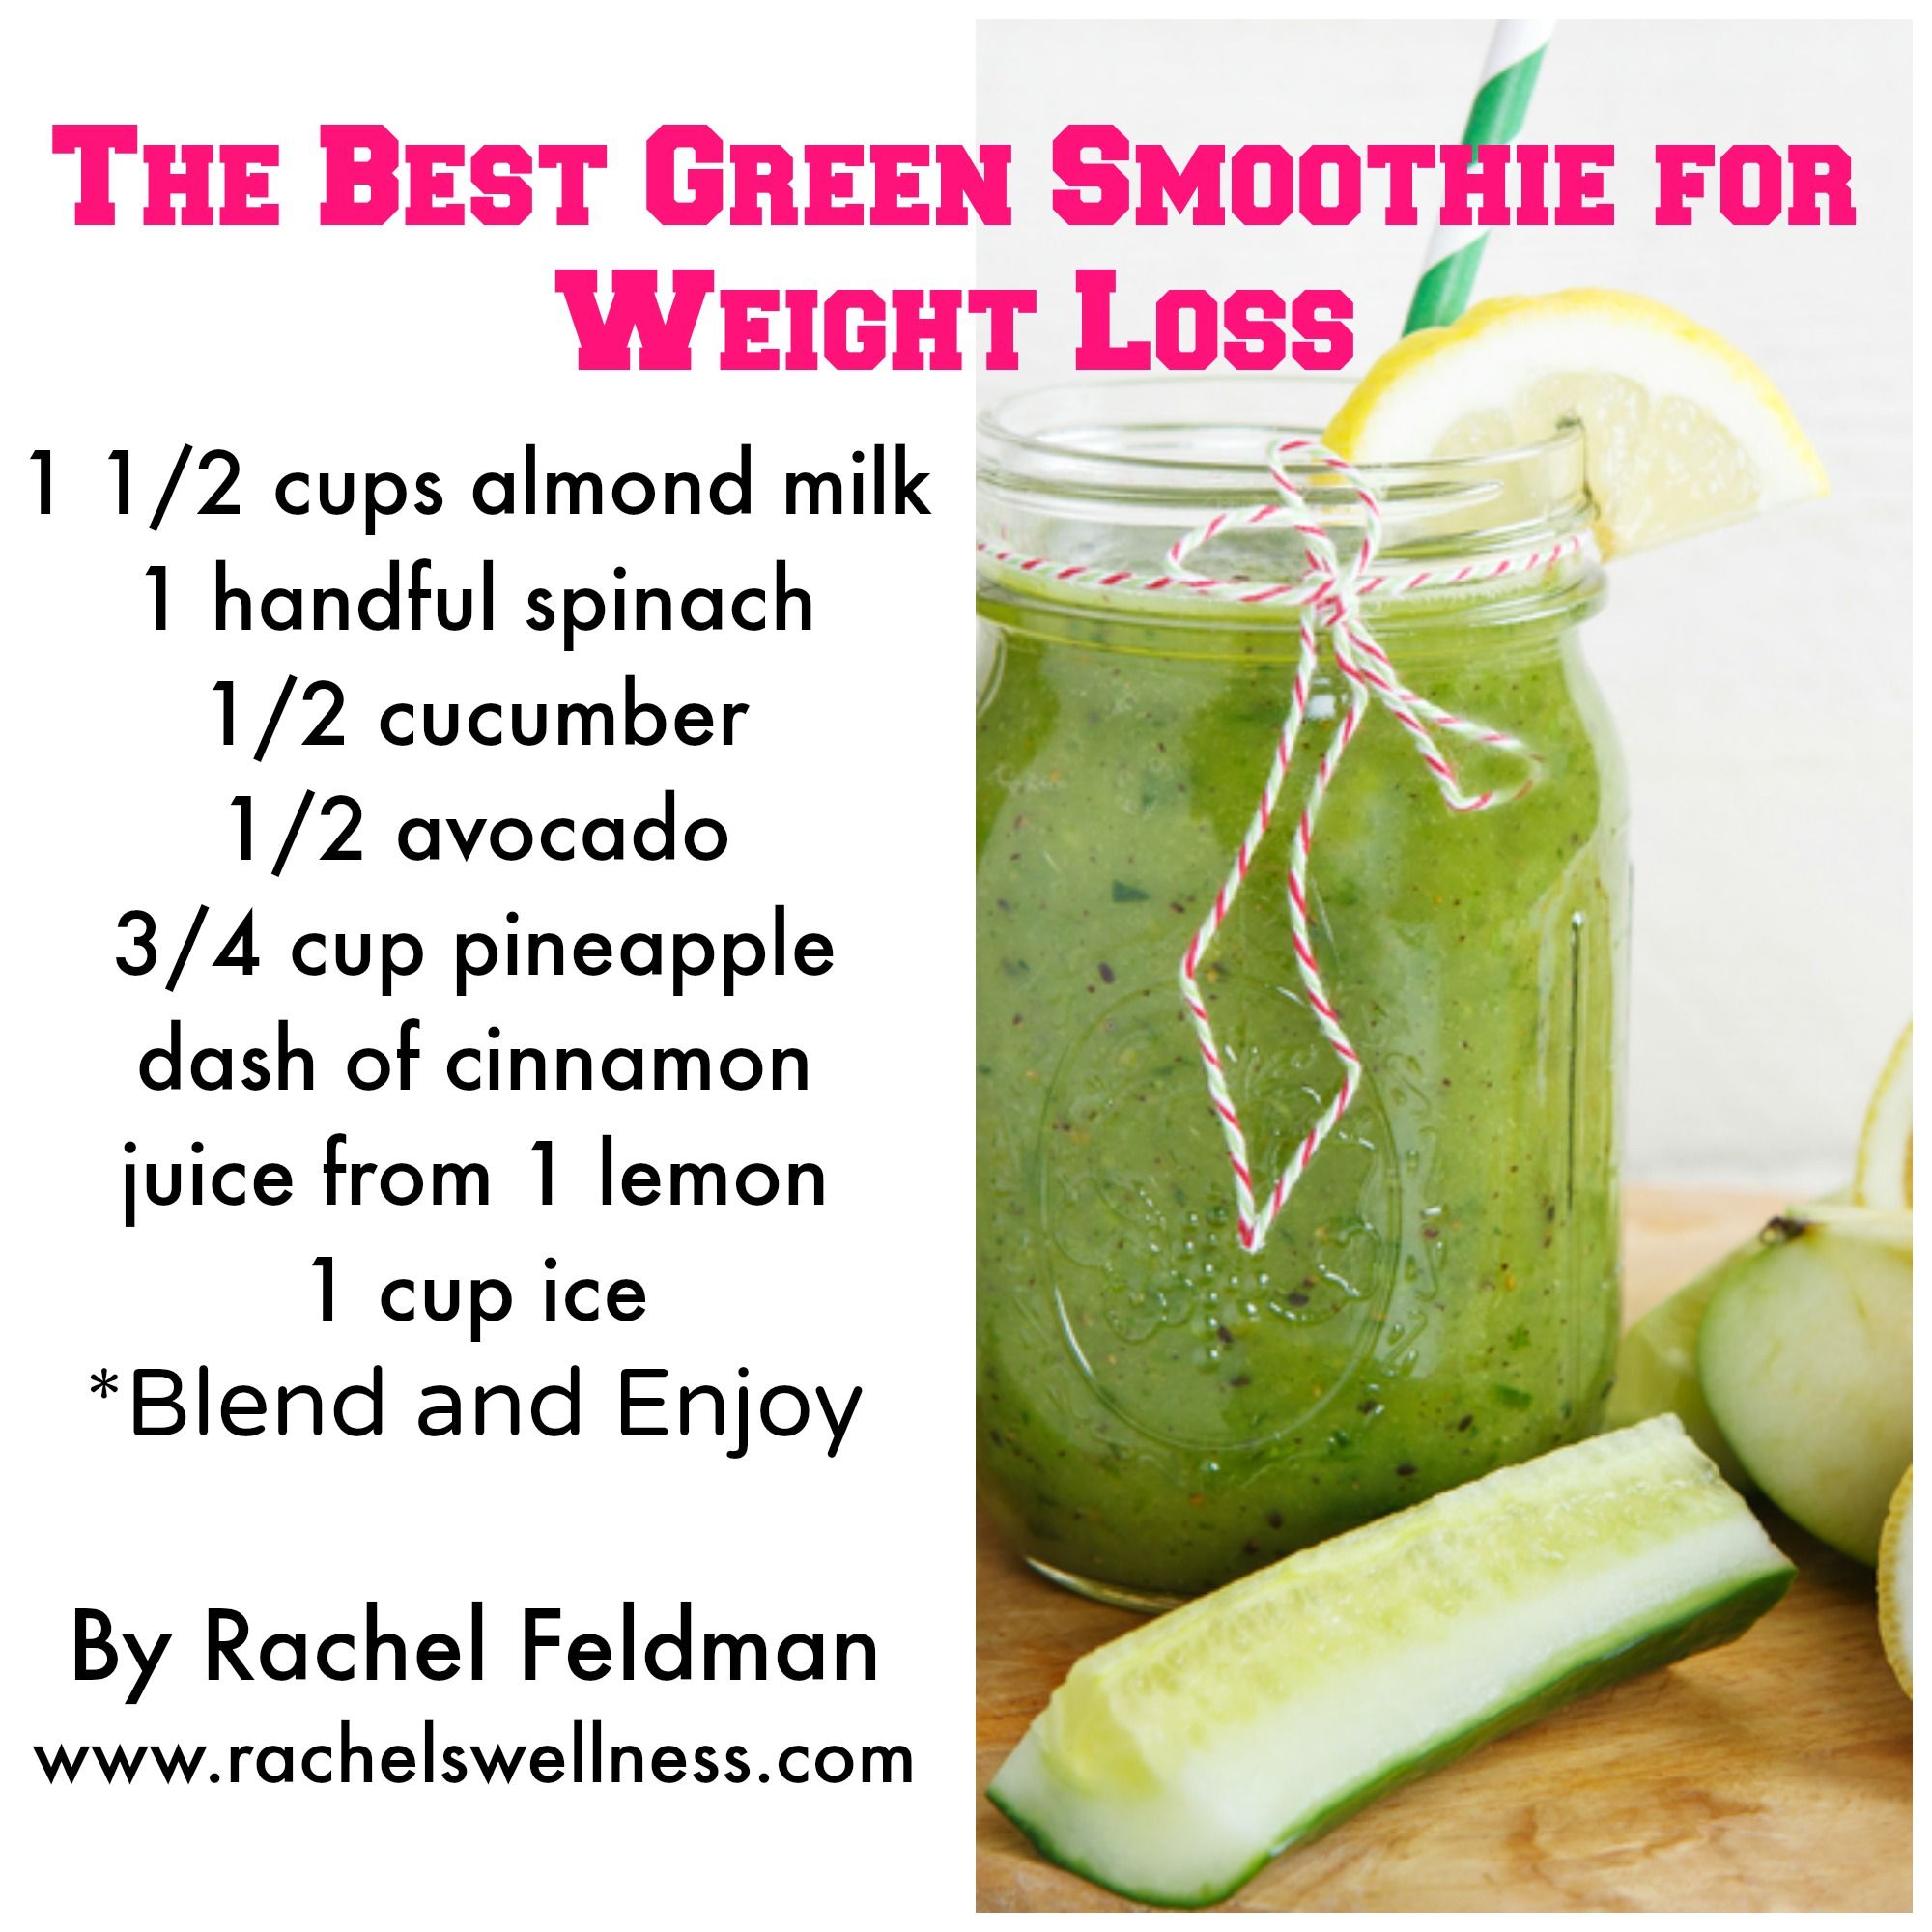 7 Healthy Green Smoothie Recipes For Weight Loss ...